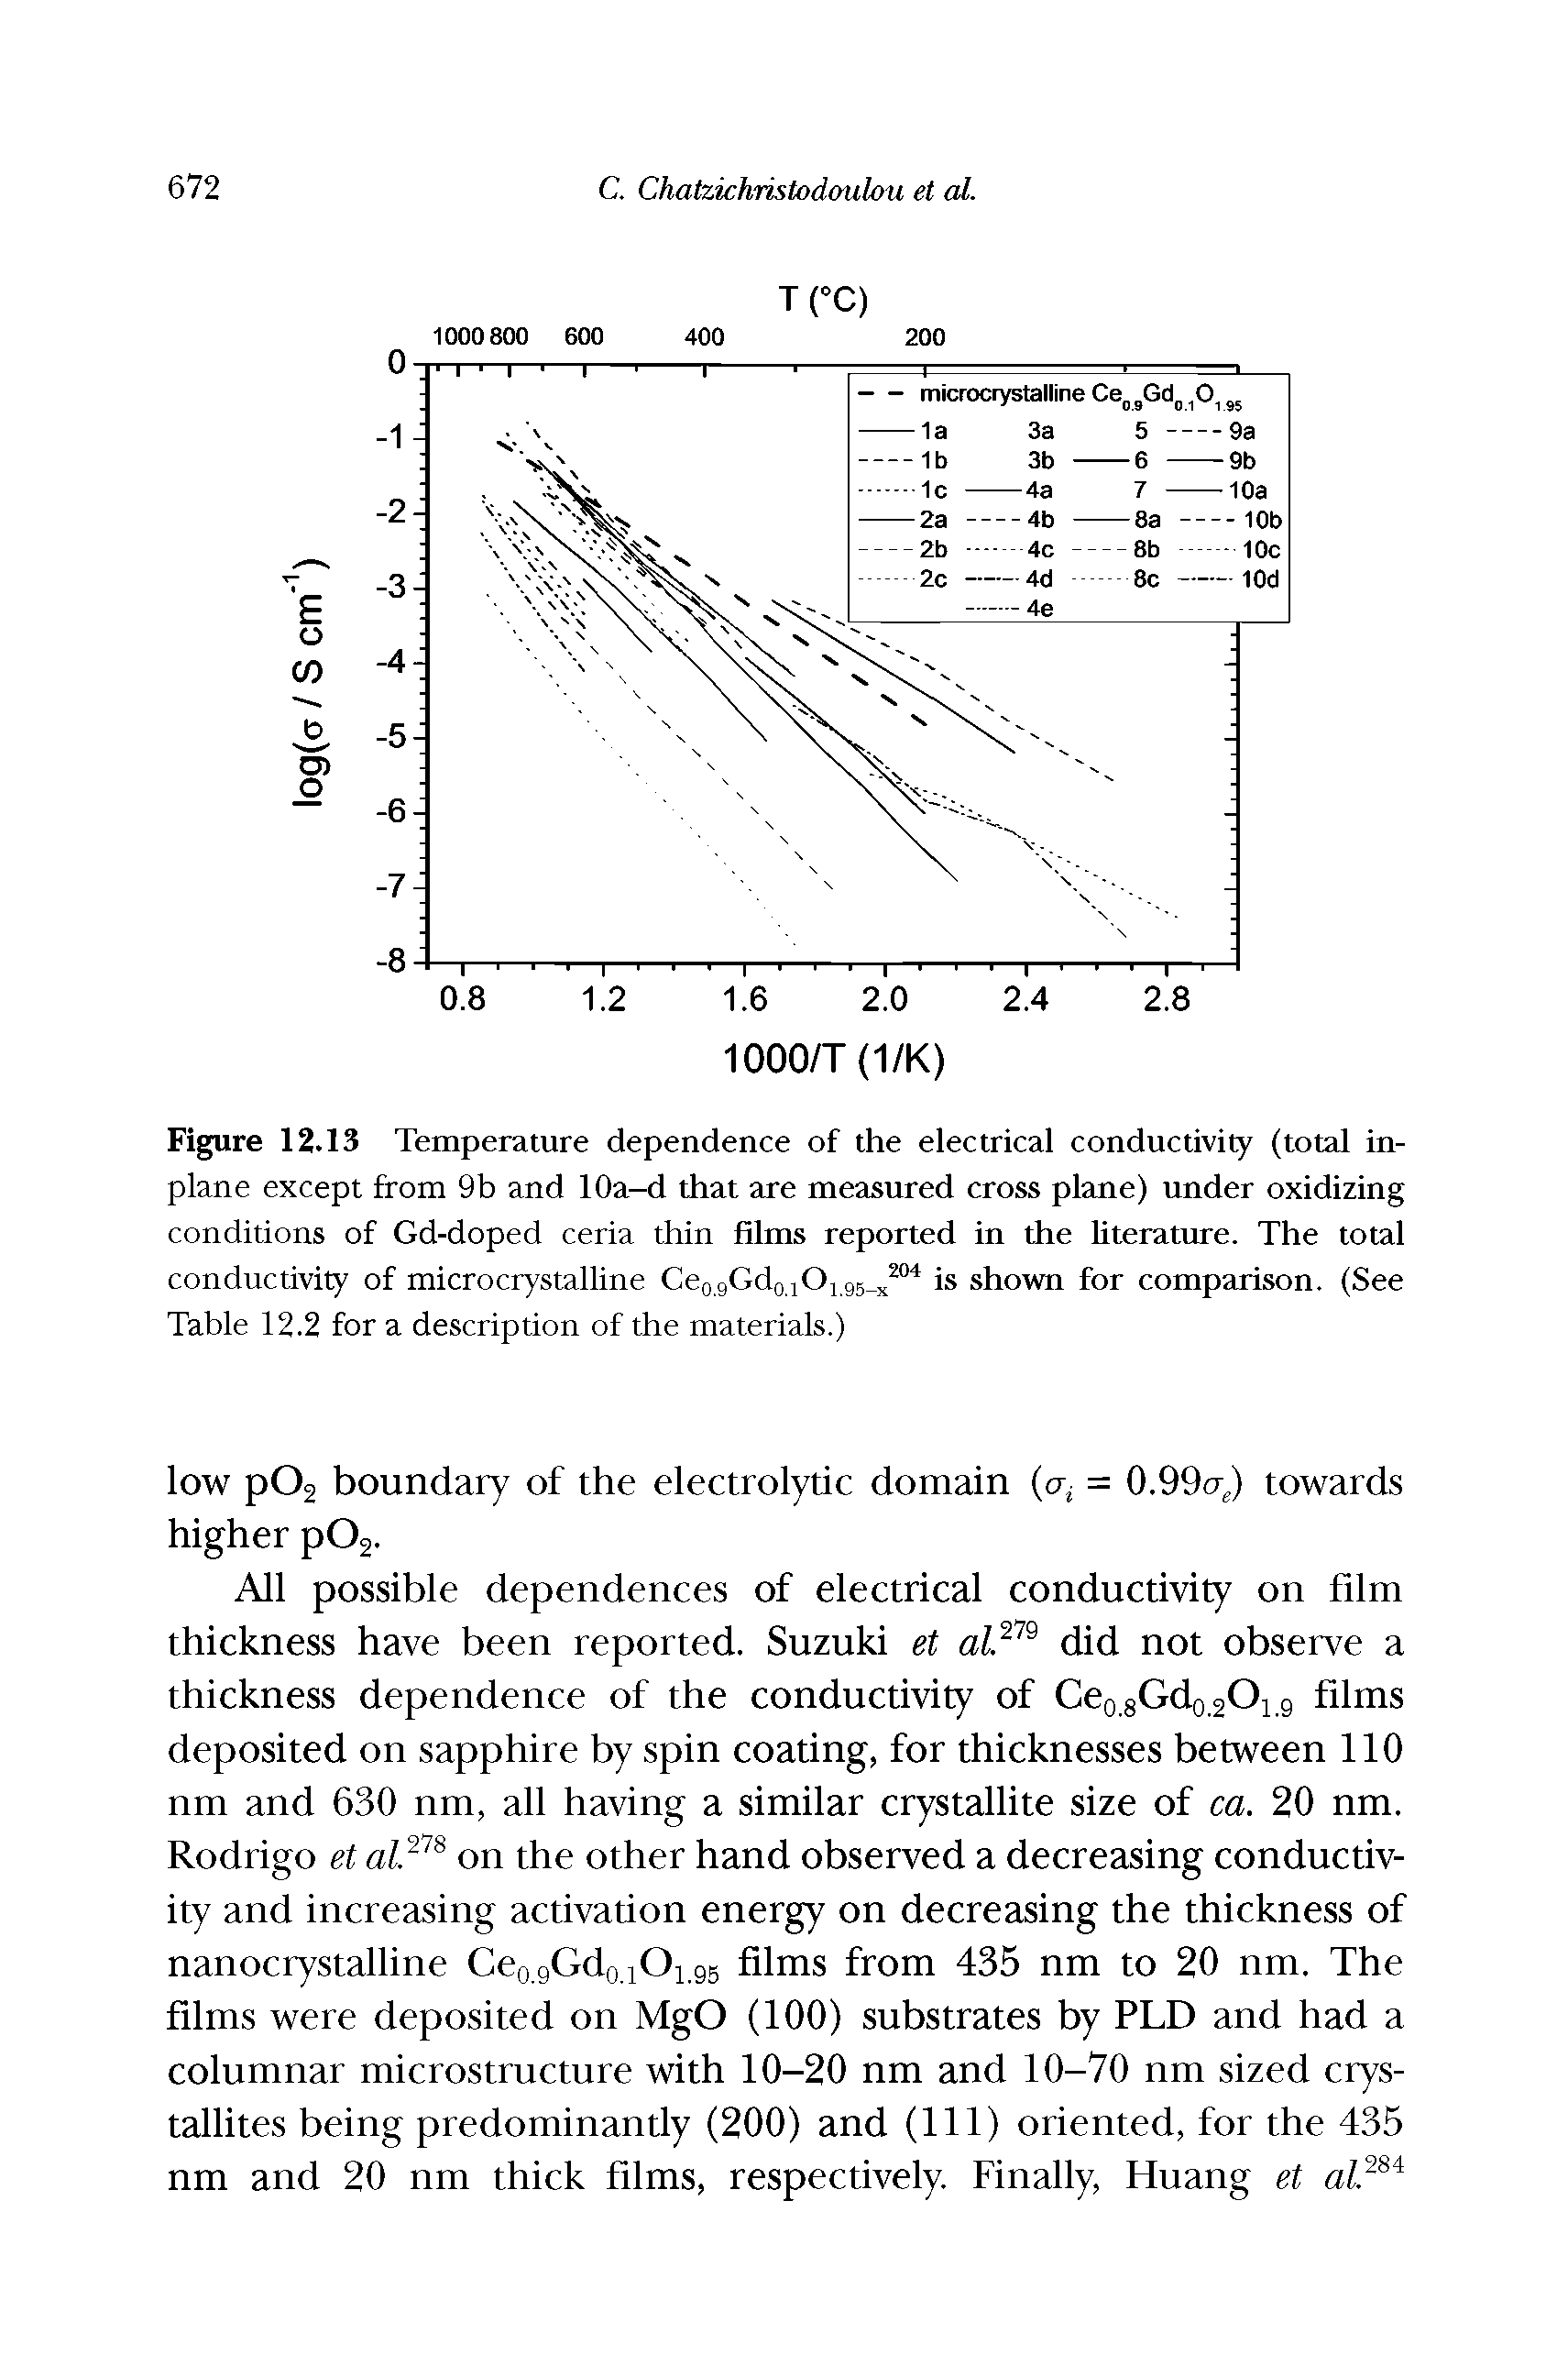 Figure 12.13 Temperature dependence of the electrical conductivity (total inplane except from 9b and lOa-d that are measured cross plane) under oxidizing conditions of Gd-doped ceria thin films reported in the literature. The total conductivity of microcrystalline Ceo.9Gdo.,0, 95 x is shown for comparison. (See Table 12.2 for a description of the materials.)...